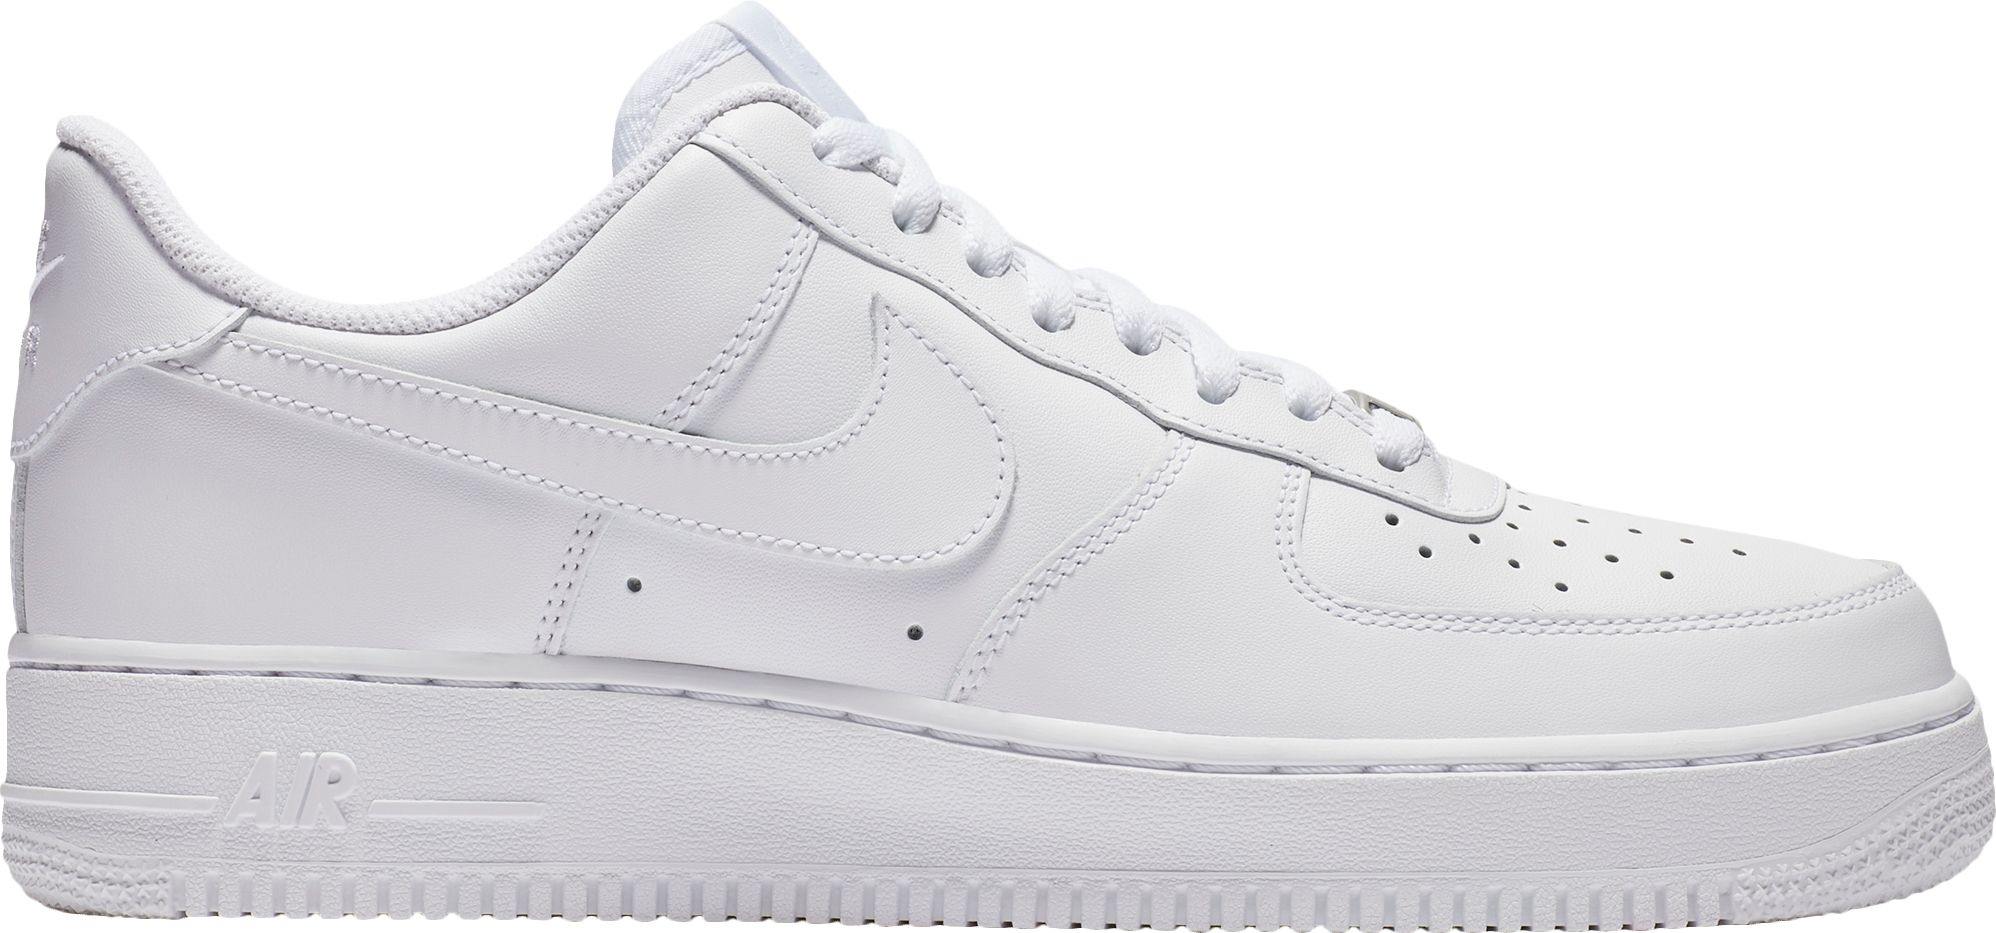 nike air force 1 womens white size 7.5 